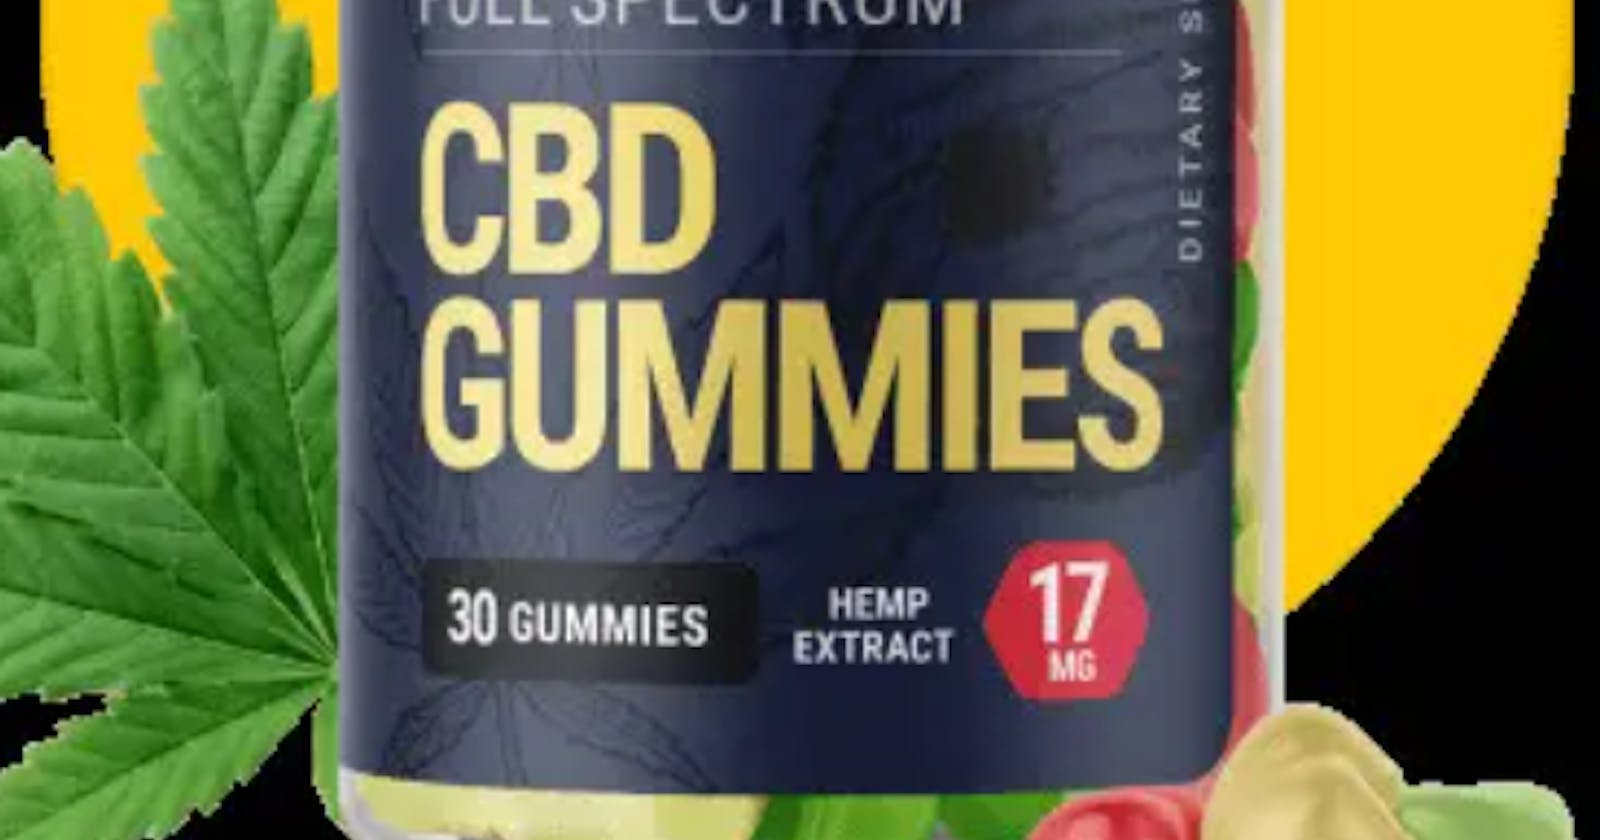 Canna Bee CBD Gummies Read Before Buying From Official Website?